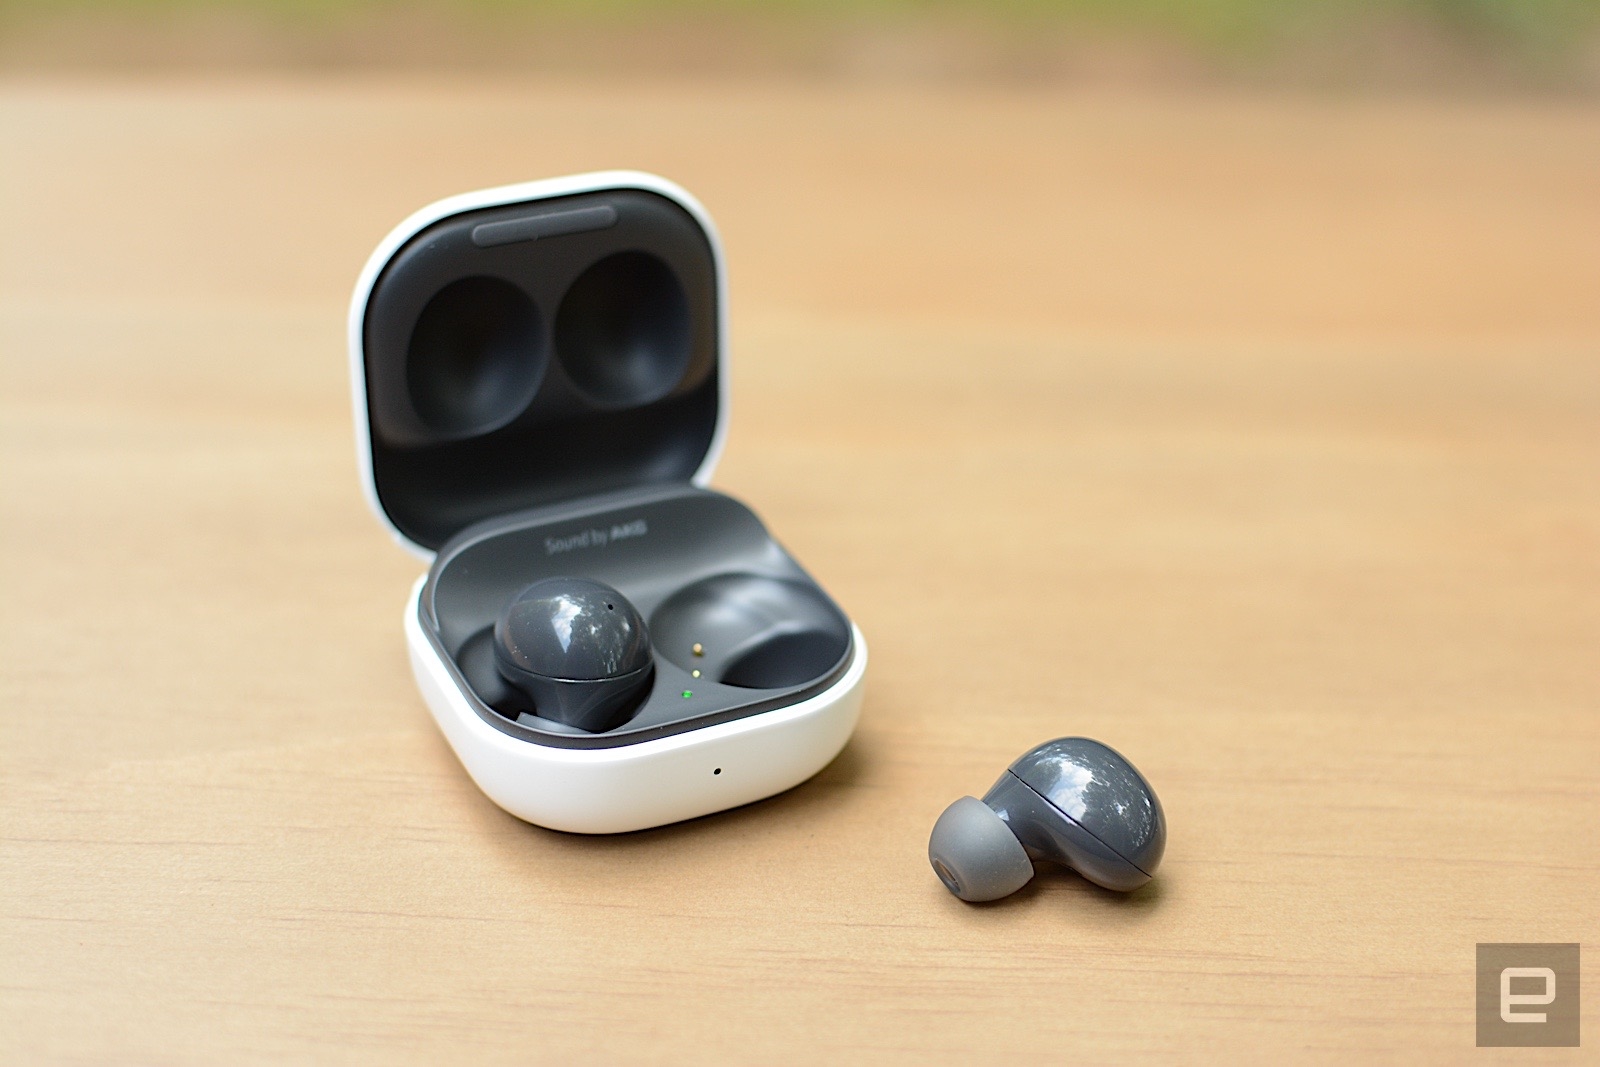 With the Galaxy Buds 2, Samsung adds active noise cancellation to its most affordable true wireless earbuds. This successor to the Galaxy Buds+ are smaller and more comfortable with premium features like wireless charging and adjustable ambient sound. However, ANC performance is only decent and there’s no deep iOS integration like previous models. Still, at this price, Samsung has created a compelling package despite the sacrifices. | DeviceDaily.com